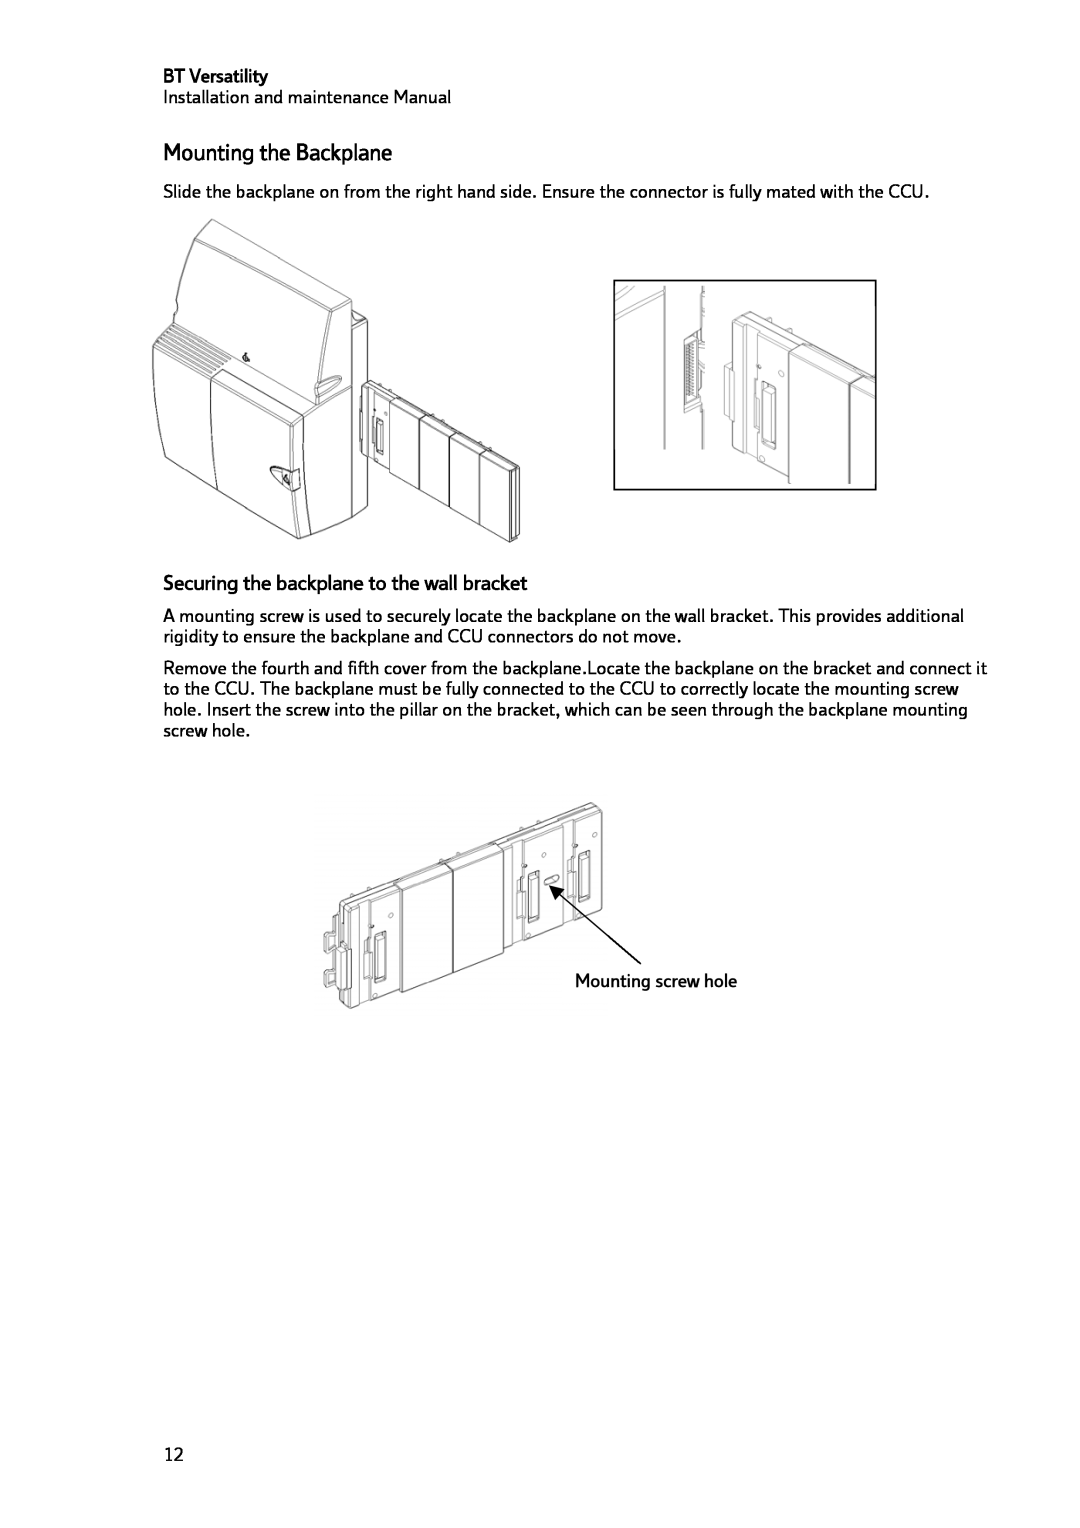 BT BT Versatility manual Mounting the Backplane, Securing the backplane to the wall bracket 